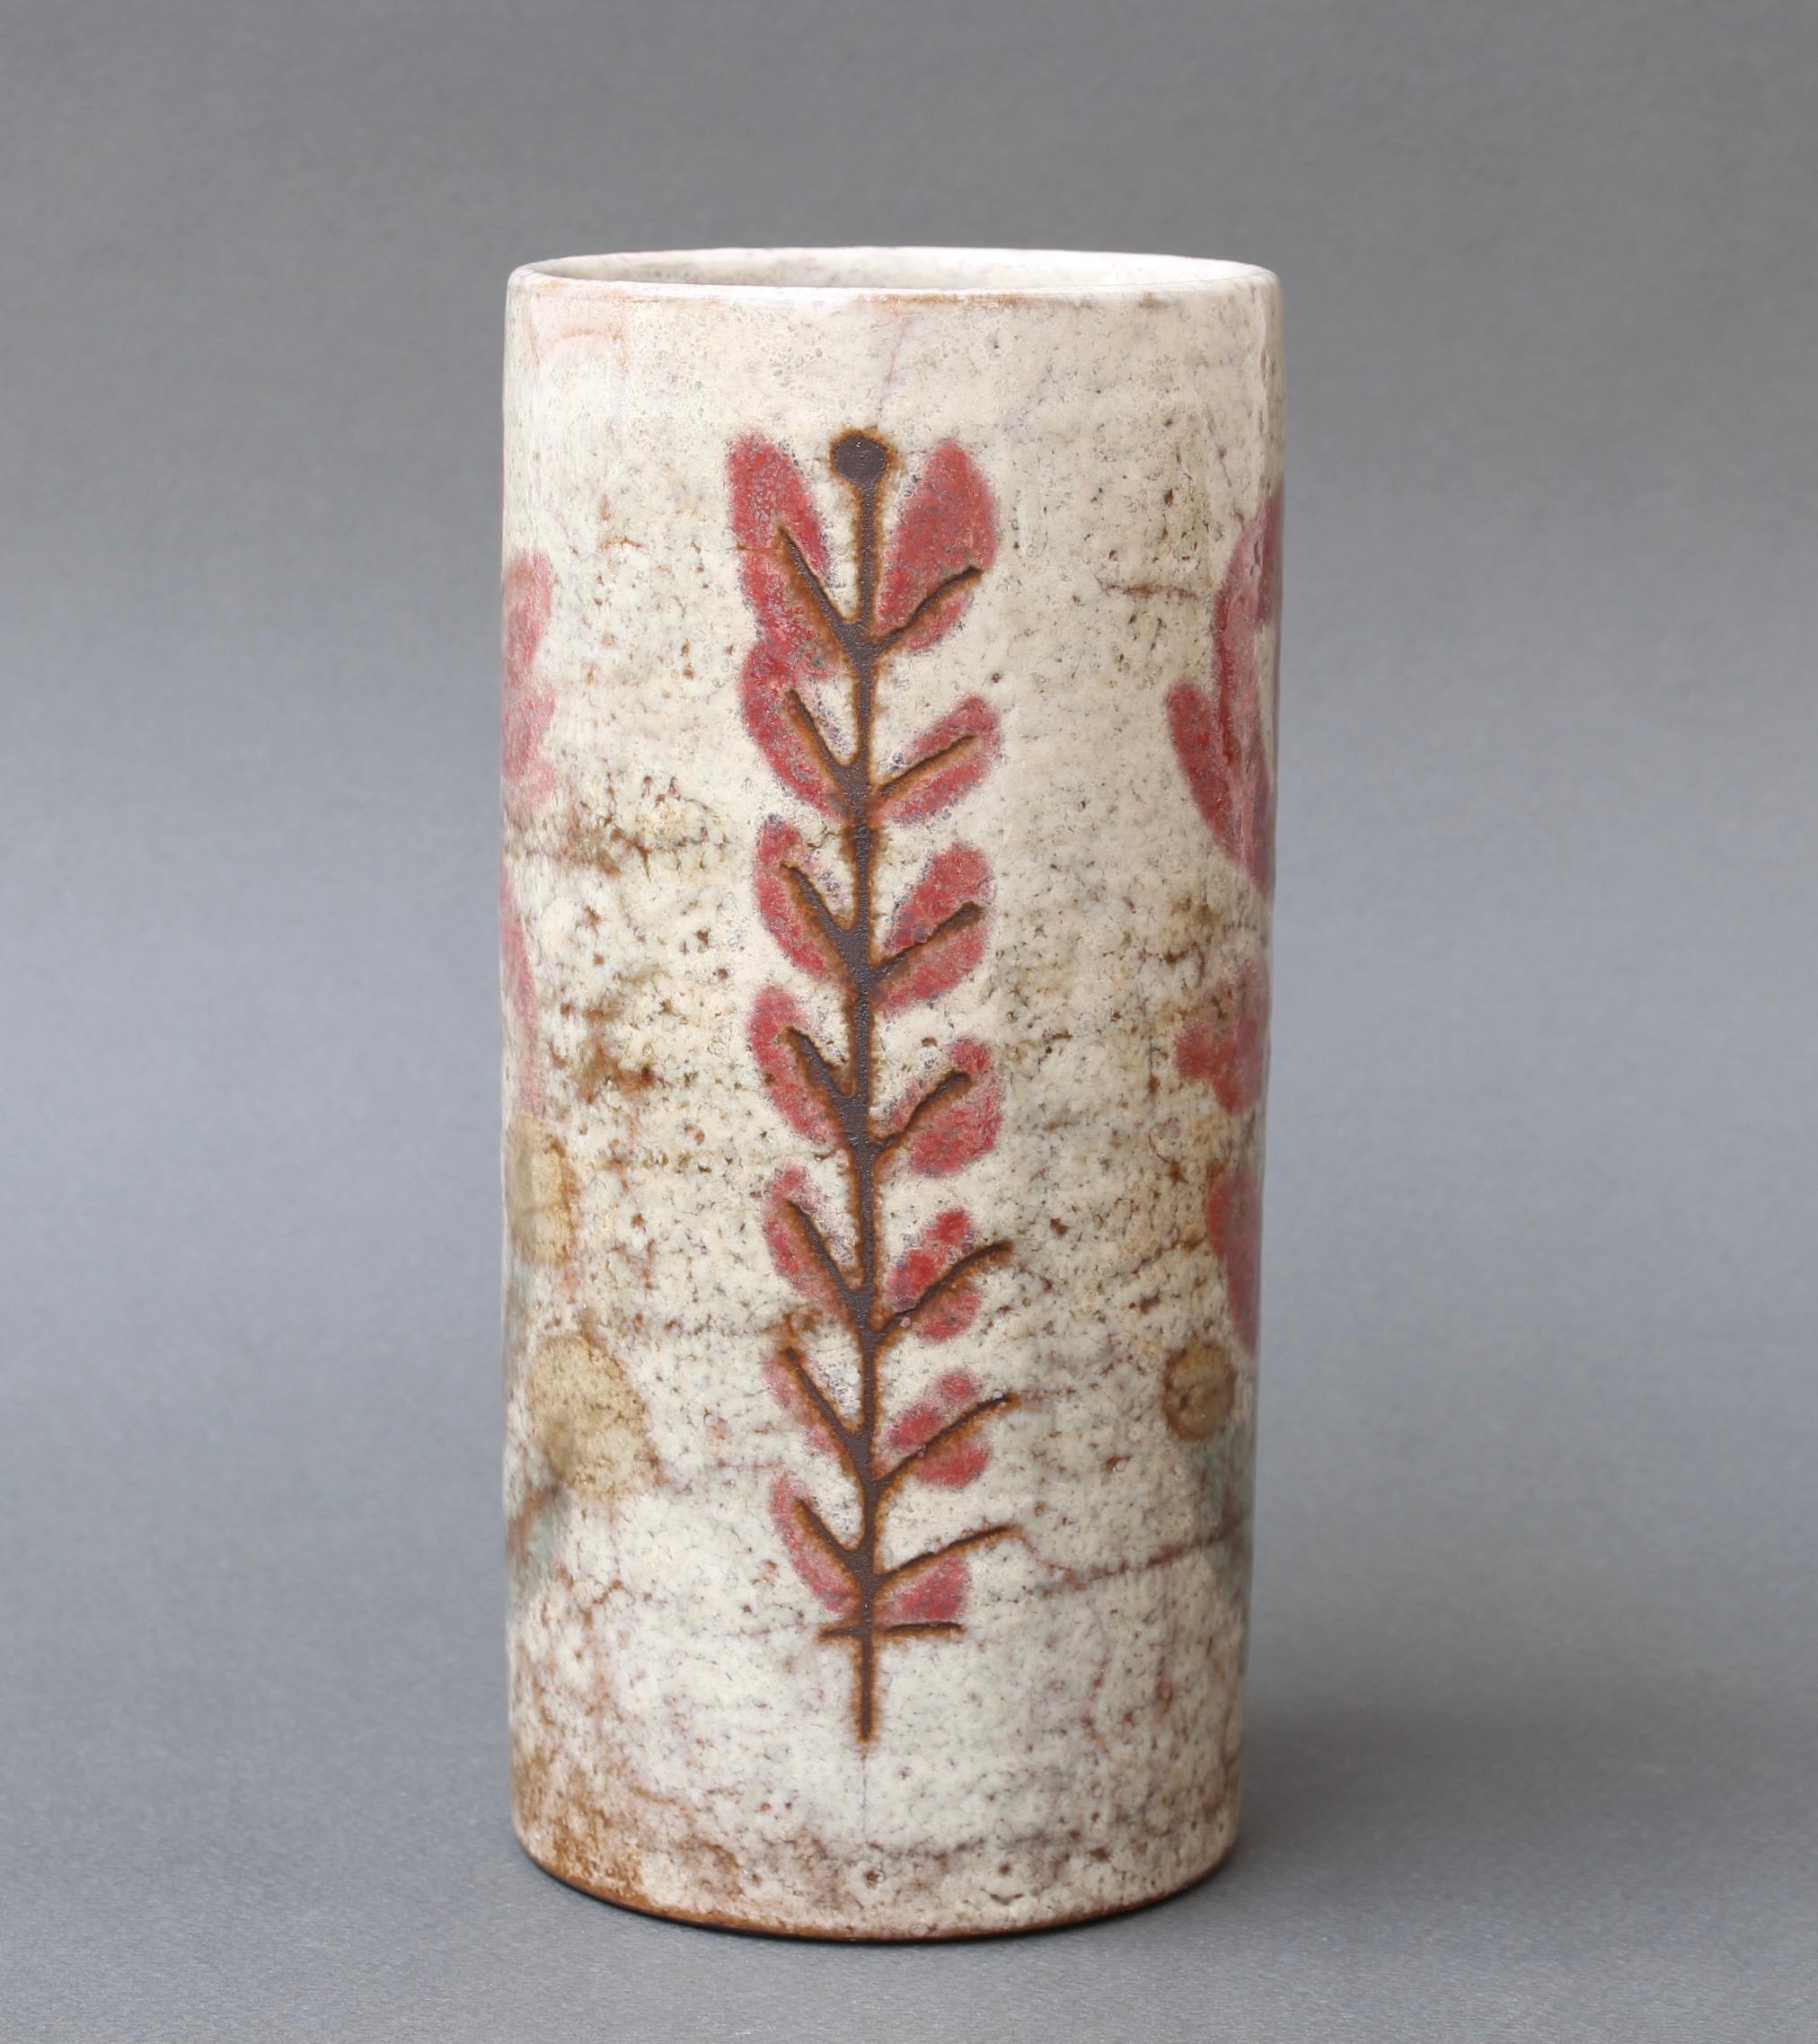 Hand-Painted Vintage French Ceramic Flower Vase by Le Mûrier (circa 1960s)